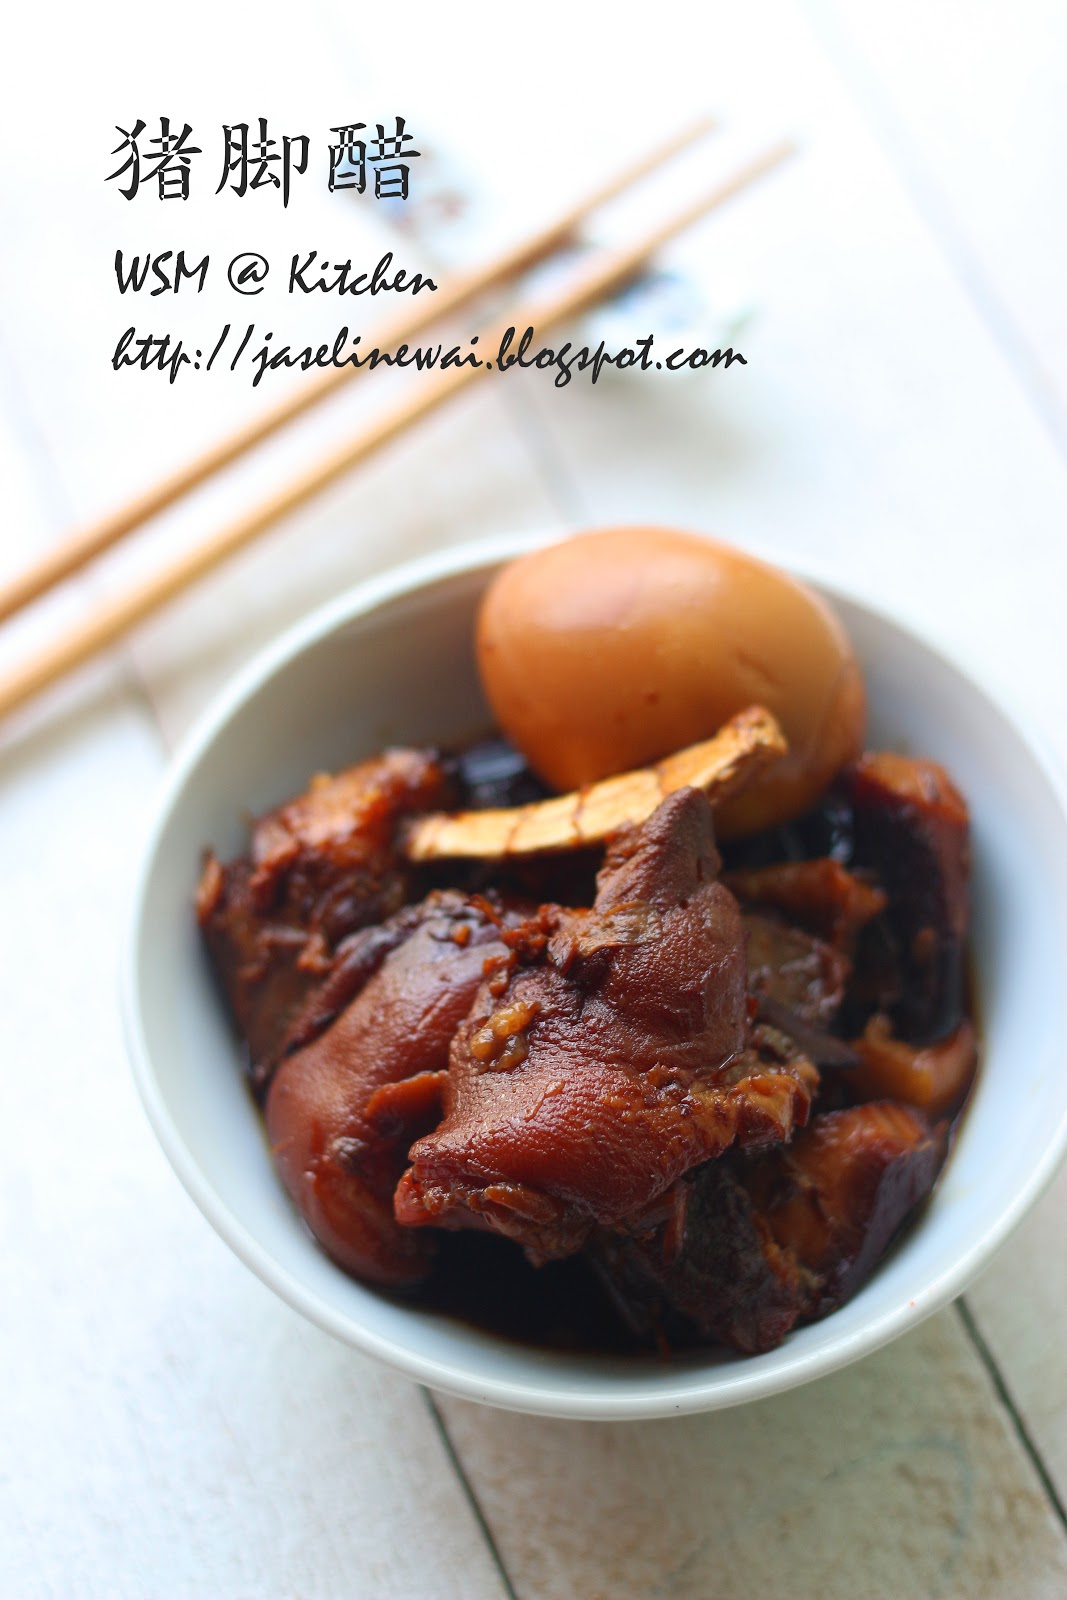 WSM @ Kitchen: 猪脚姜醋 Pig trotter with ginger and vinegar